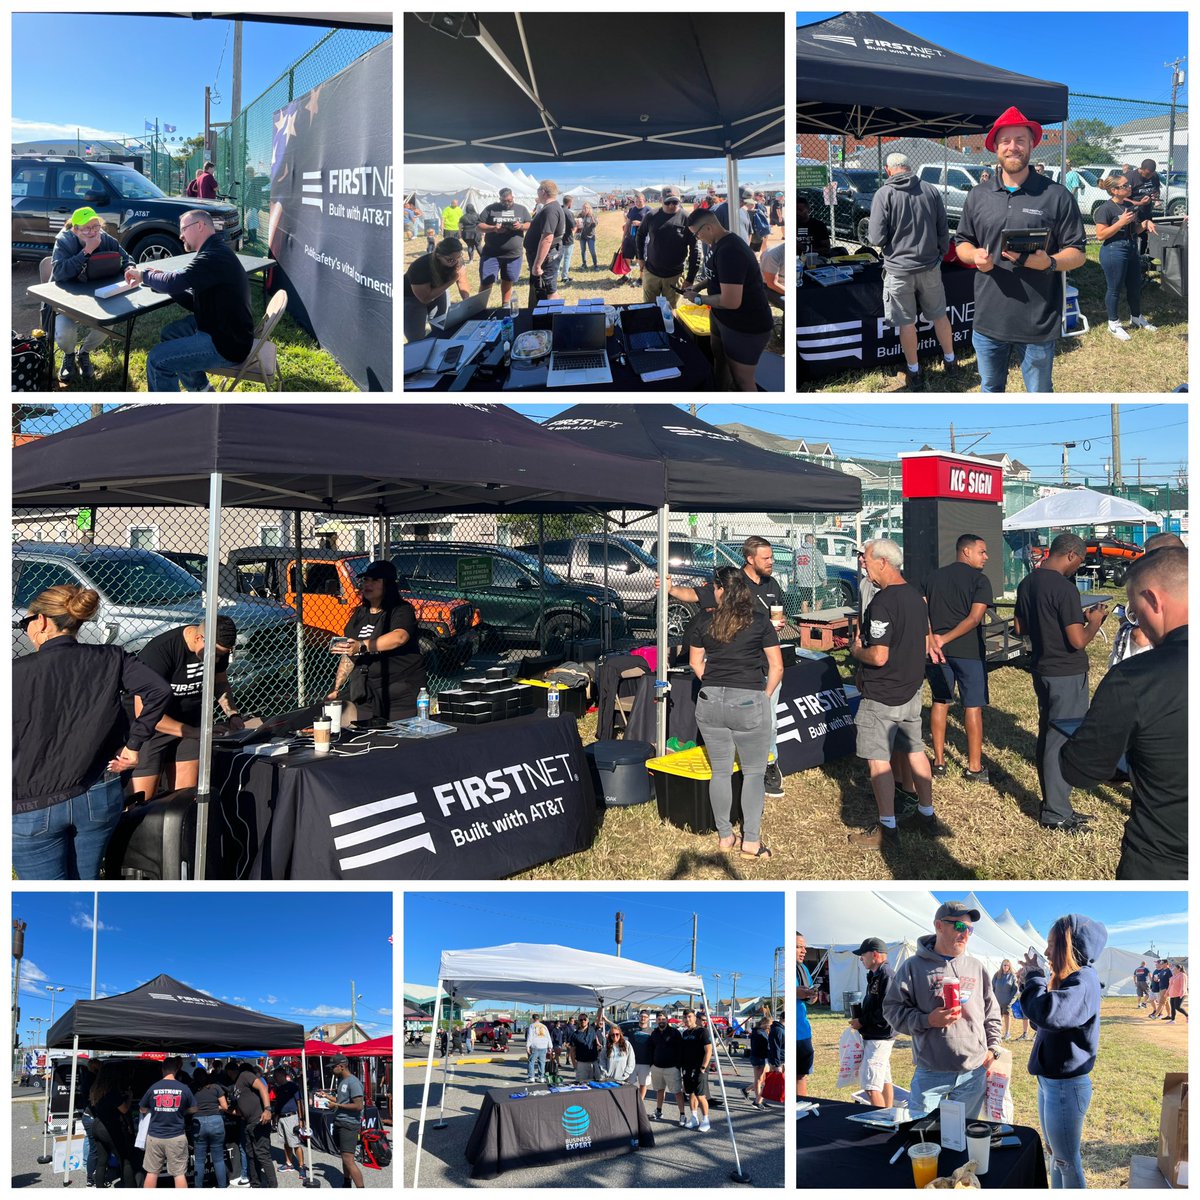 This past weekend #NYNJ & #OHPA collaborated on the BIGGEST event of the year! Wildwood Fireman’s Expo Thank You for welcoming #FirstNet with open arms #LifeAtATT @judy_cavalieri @jessicamcarval @marcellobenny @Vinecia_F @jas_vargas5